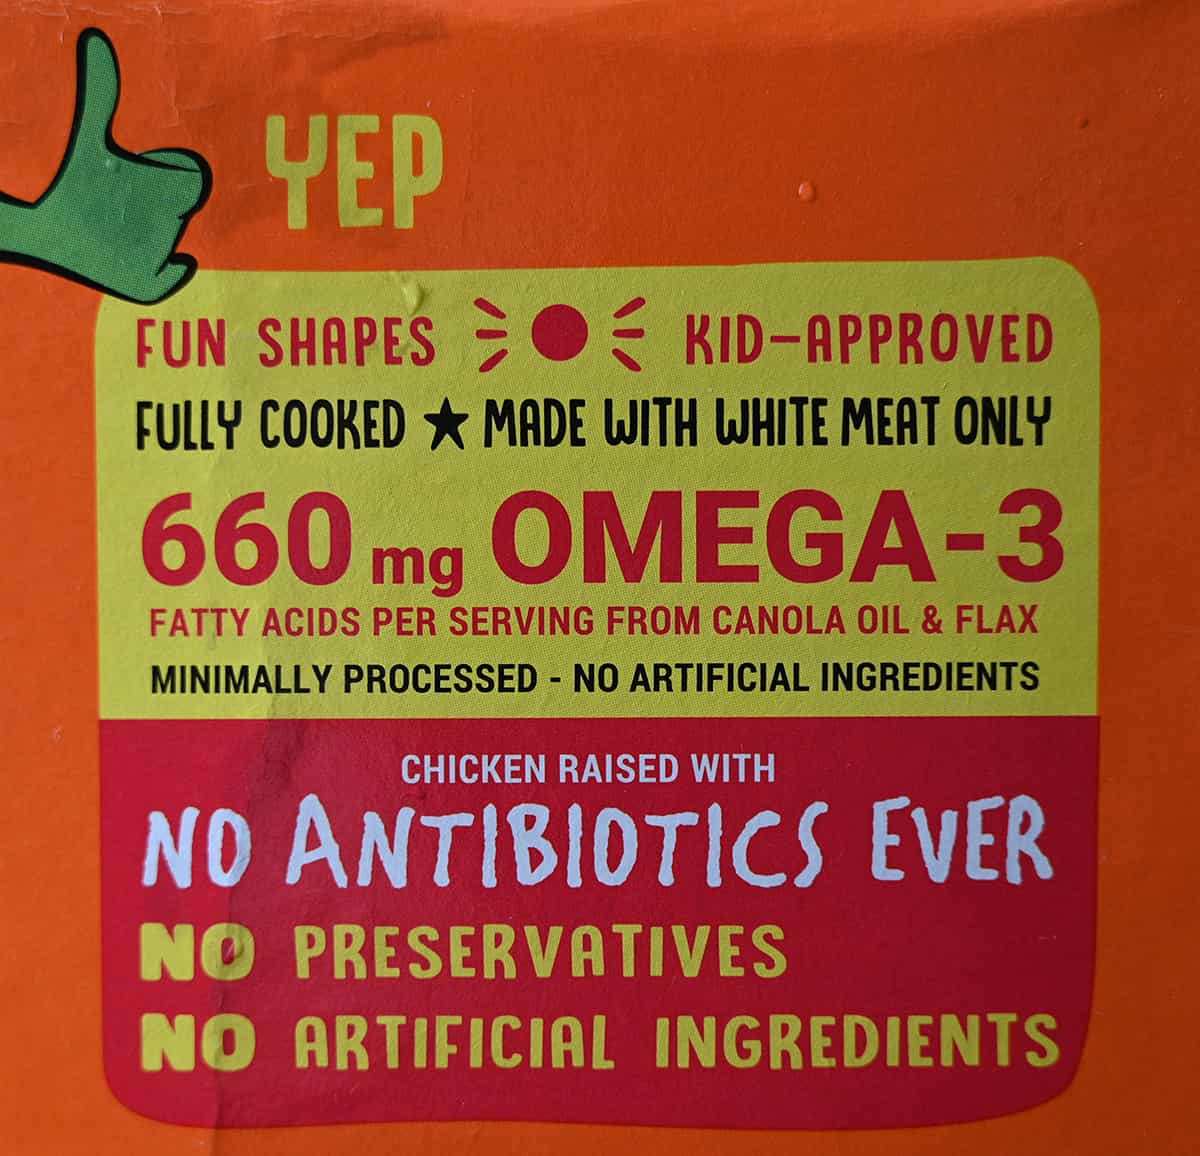 Image of the back of the box of nuggets showing 660 mg of omega 3 fatty acid per serving.